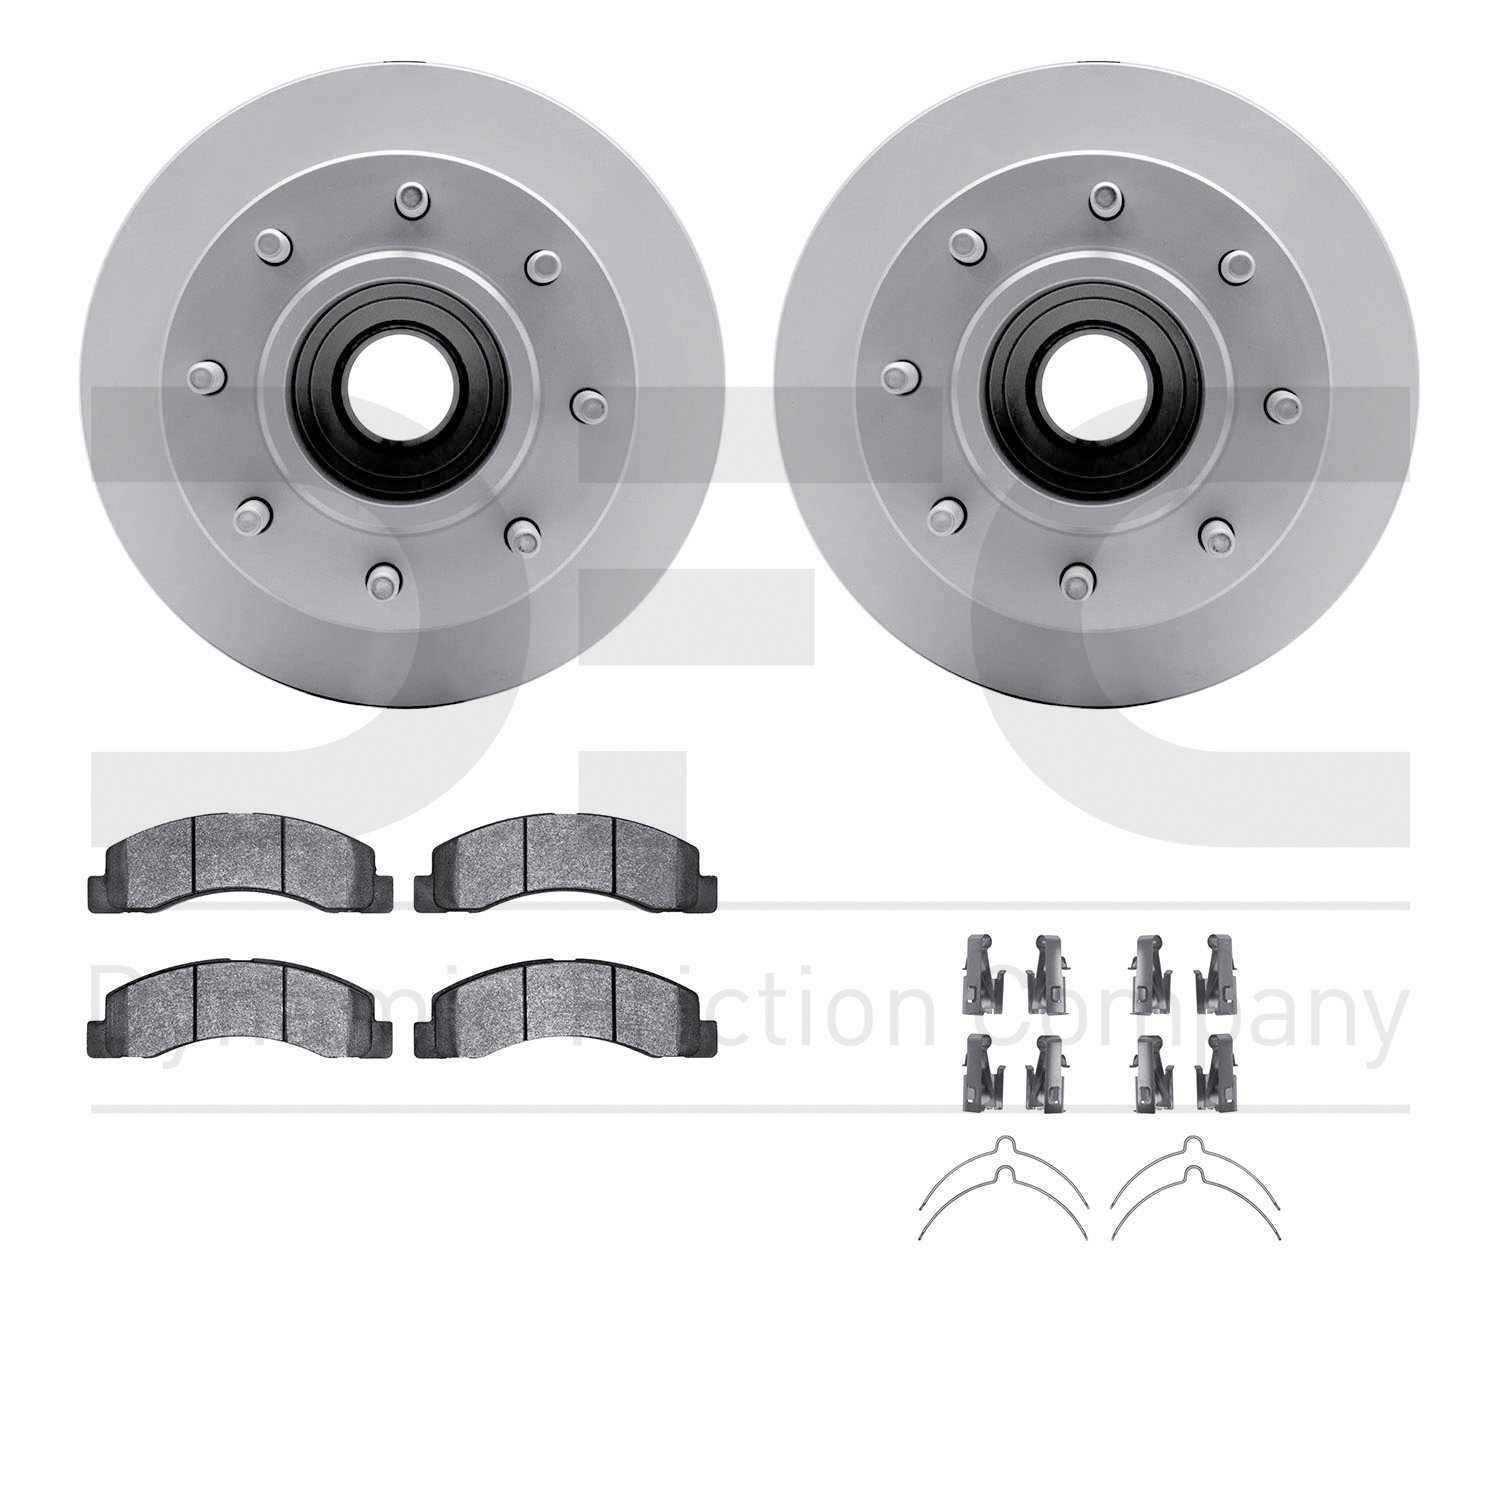 4412-54026 Geospec Brake Rotors with Ultimate-Duty Brake Pads & Hardware, 1999-2002 Ford/Lincoln/Mercury/Mazda, Position: Front